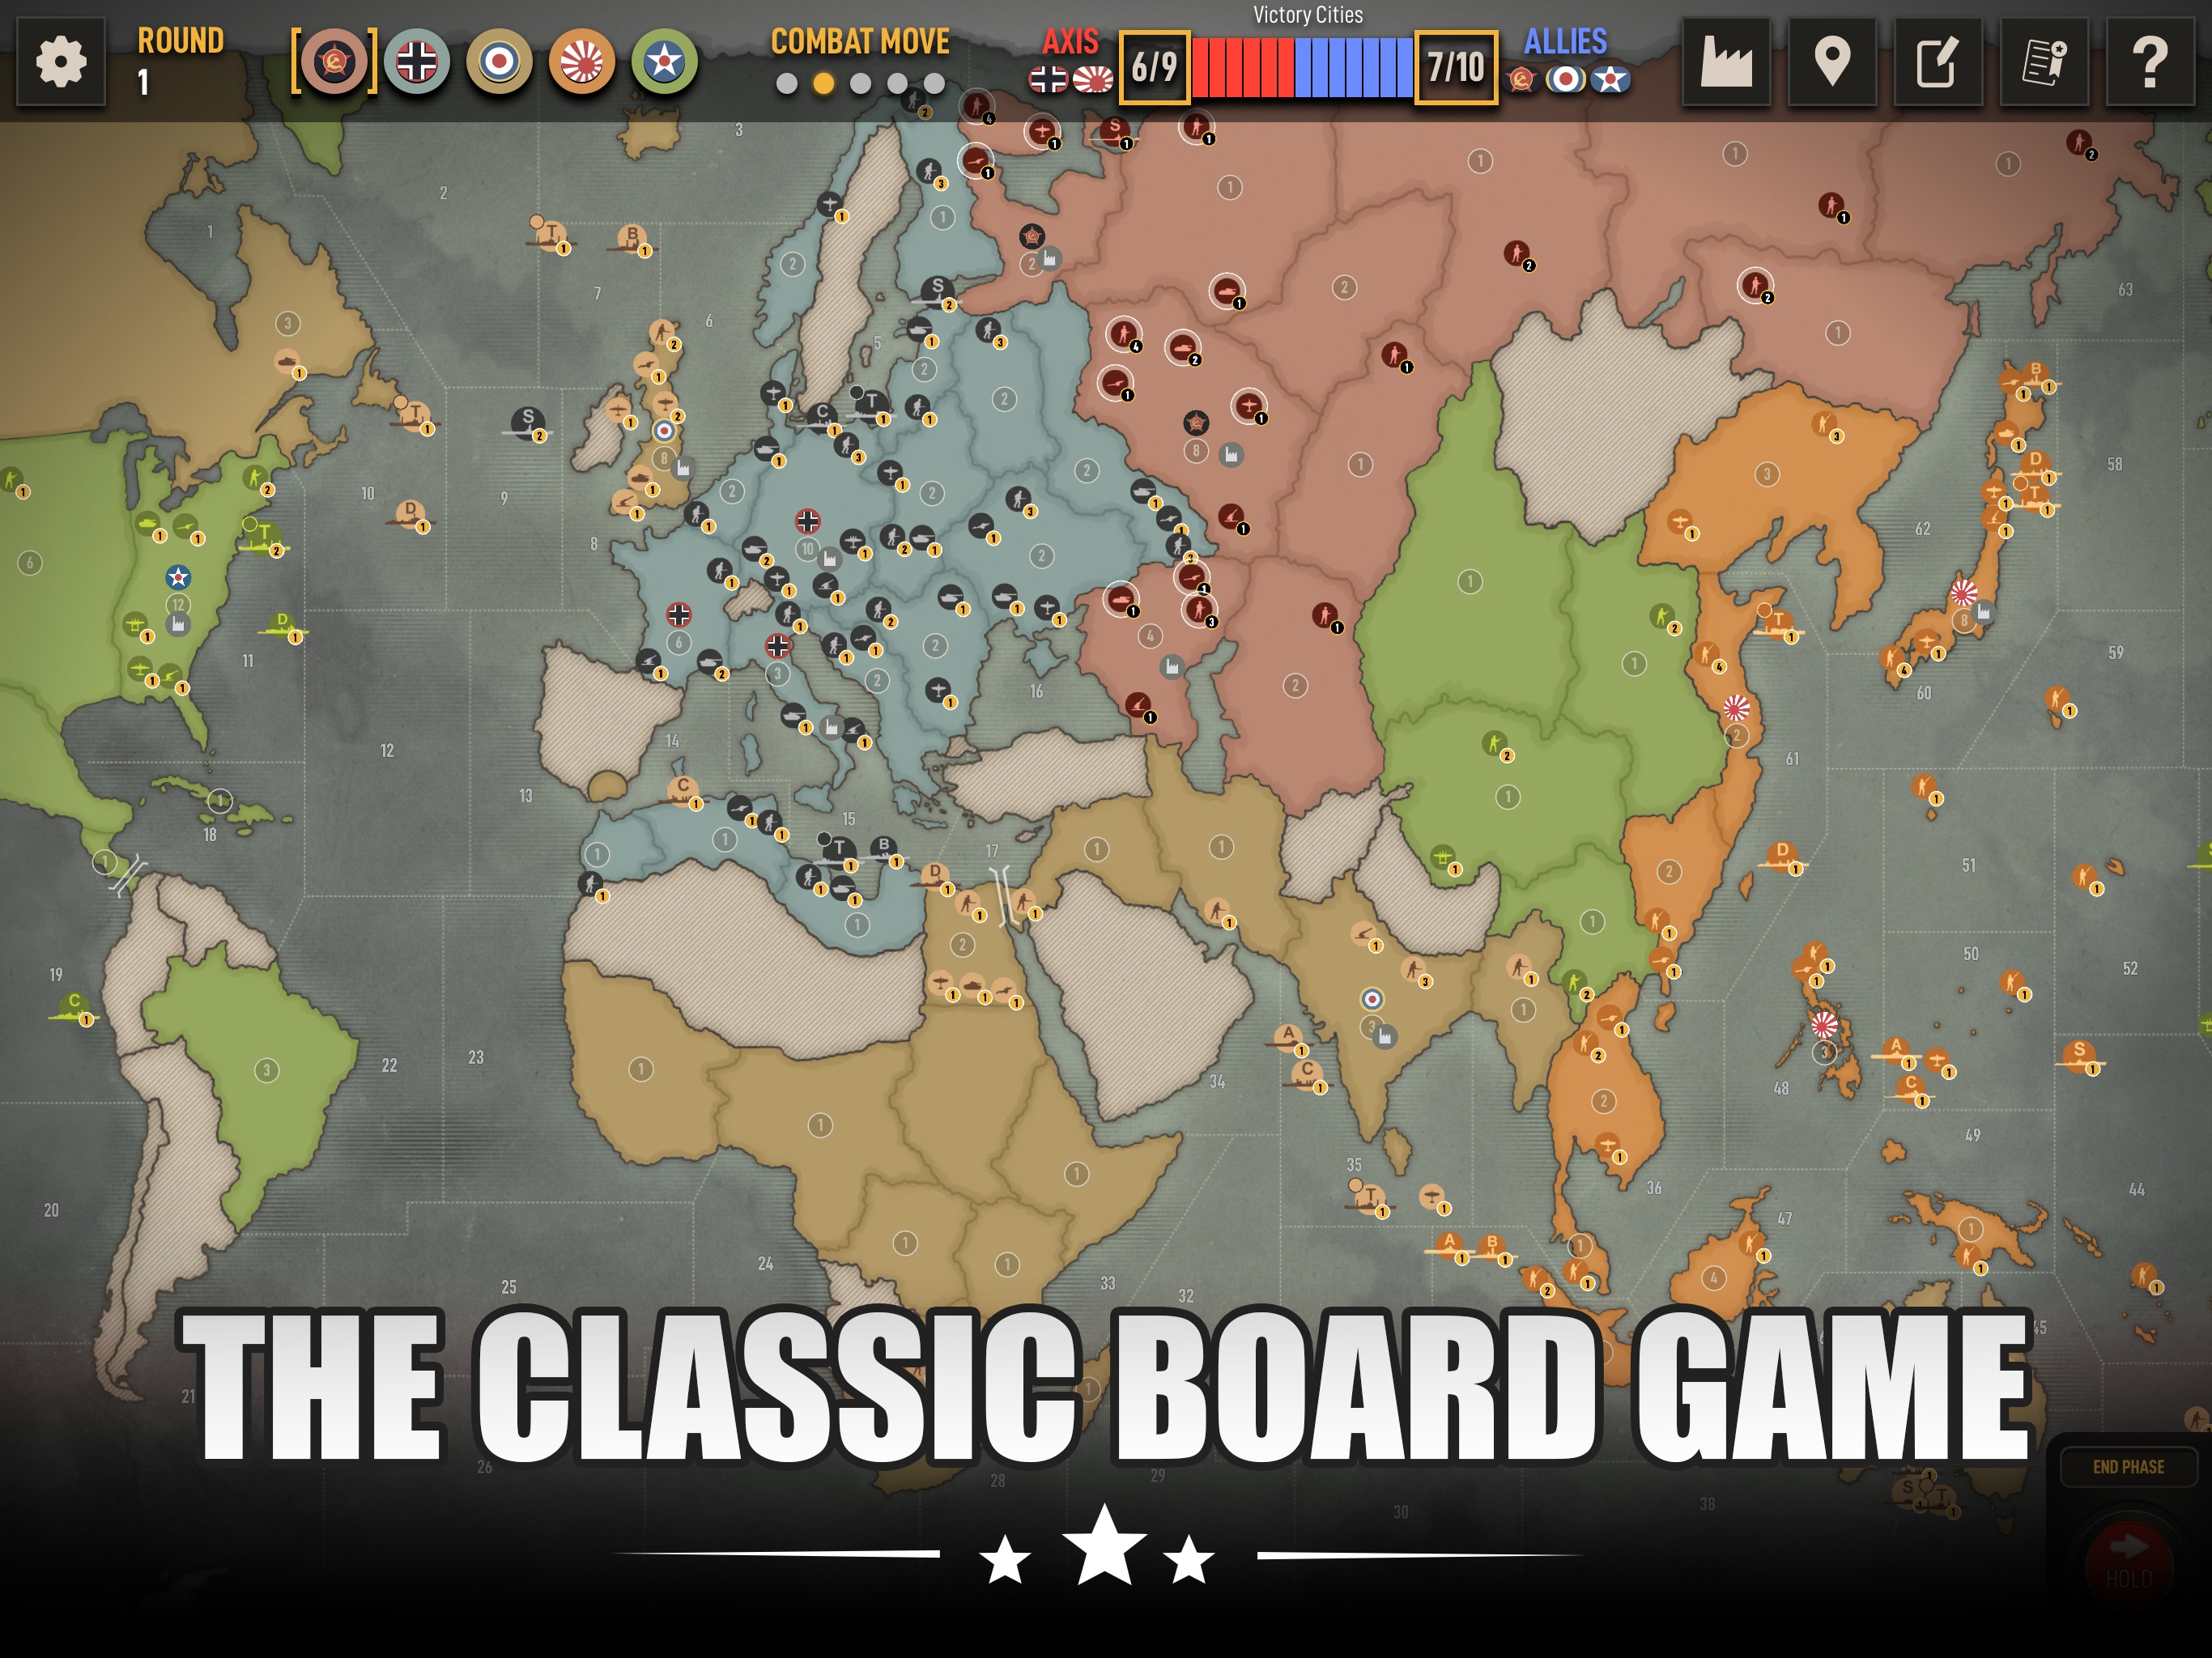 Axis & Allies - Codex Gamicus - Humanity's collective gaming knowledge at  your fingertips.